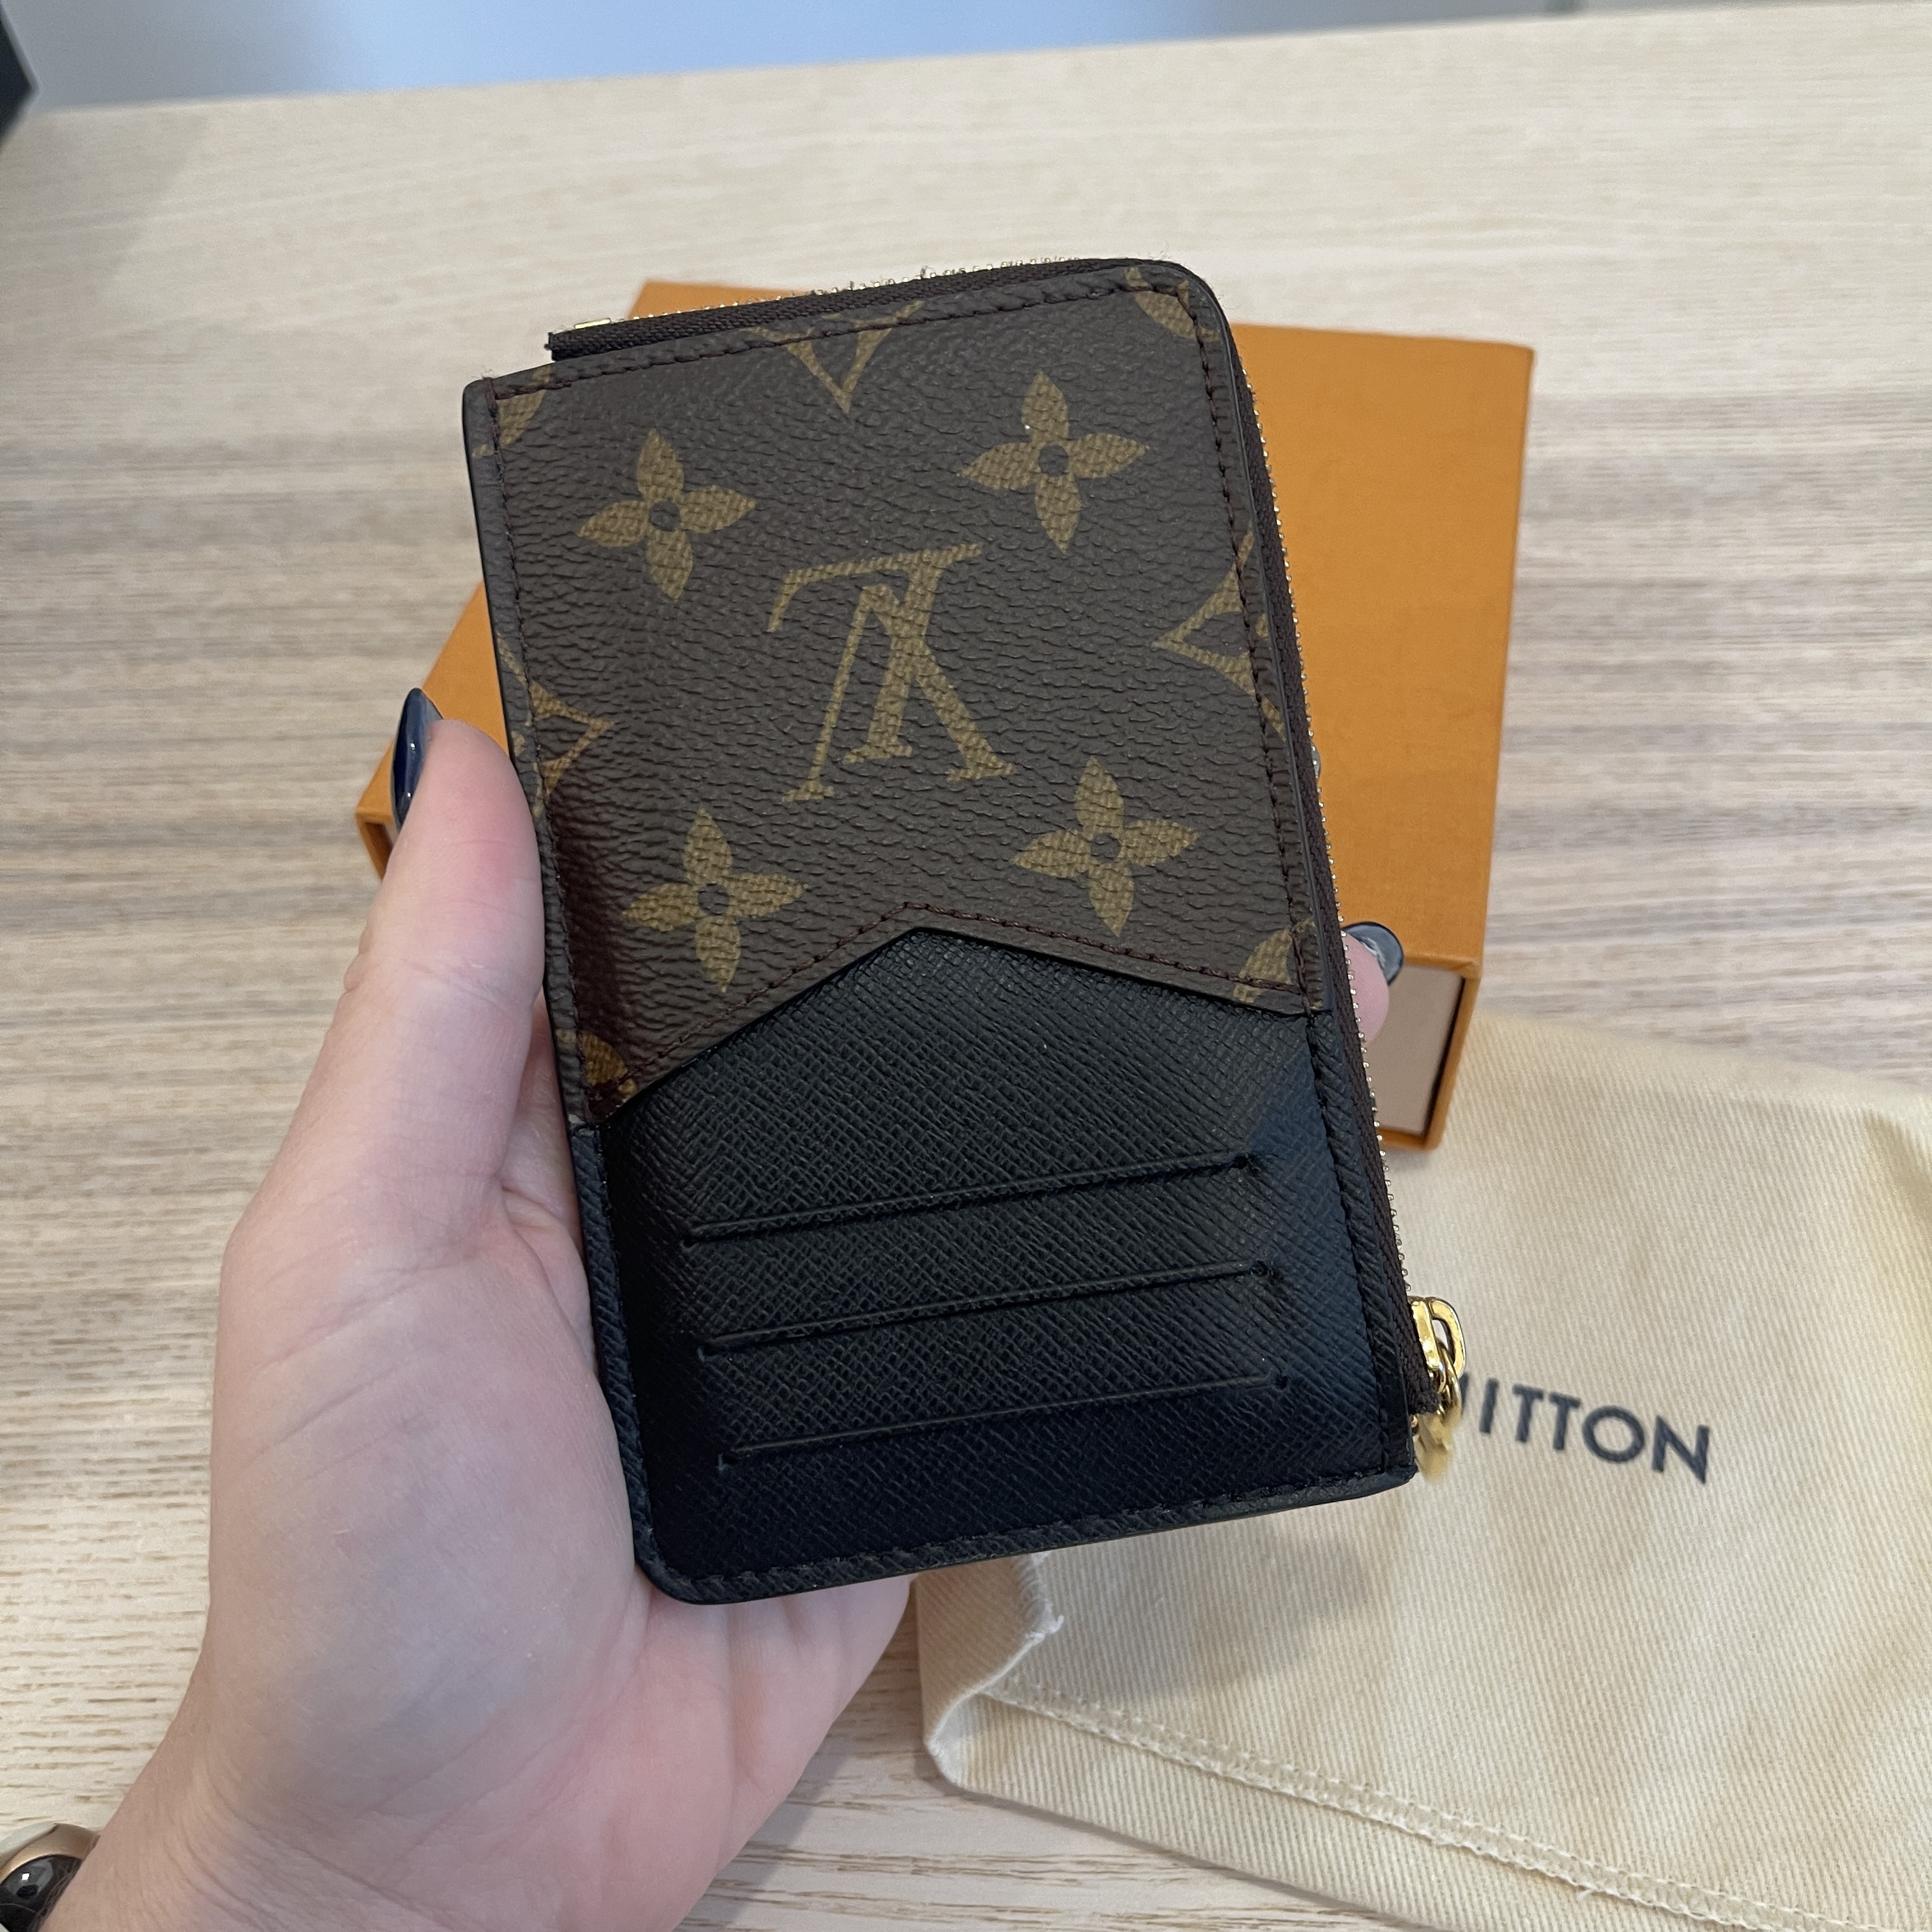 LOUIS VUITTON RECTO VERSO CARD HOLDER N60405 MADE IN FRNCE